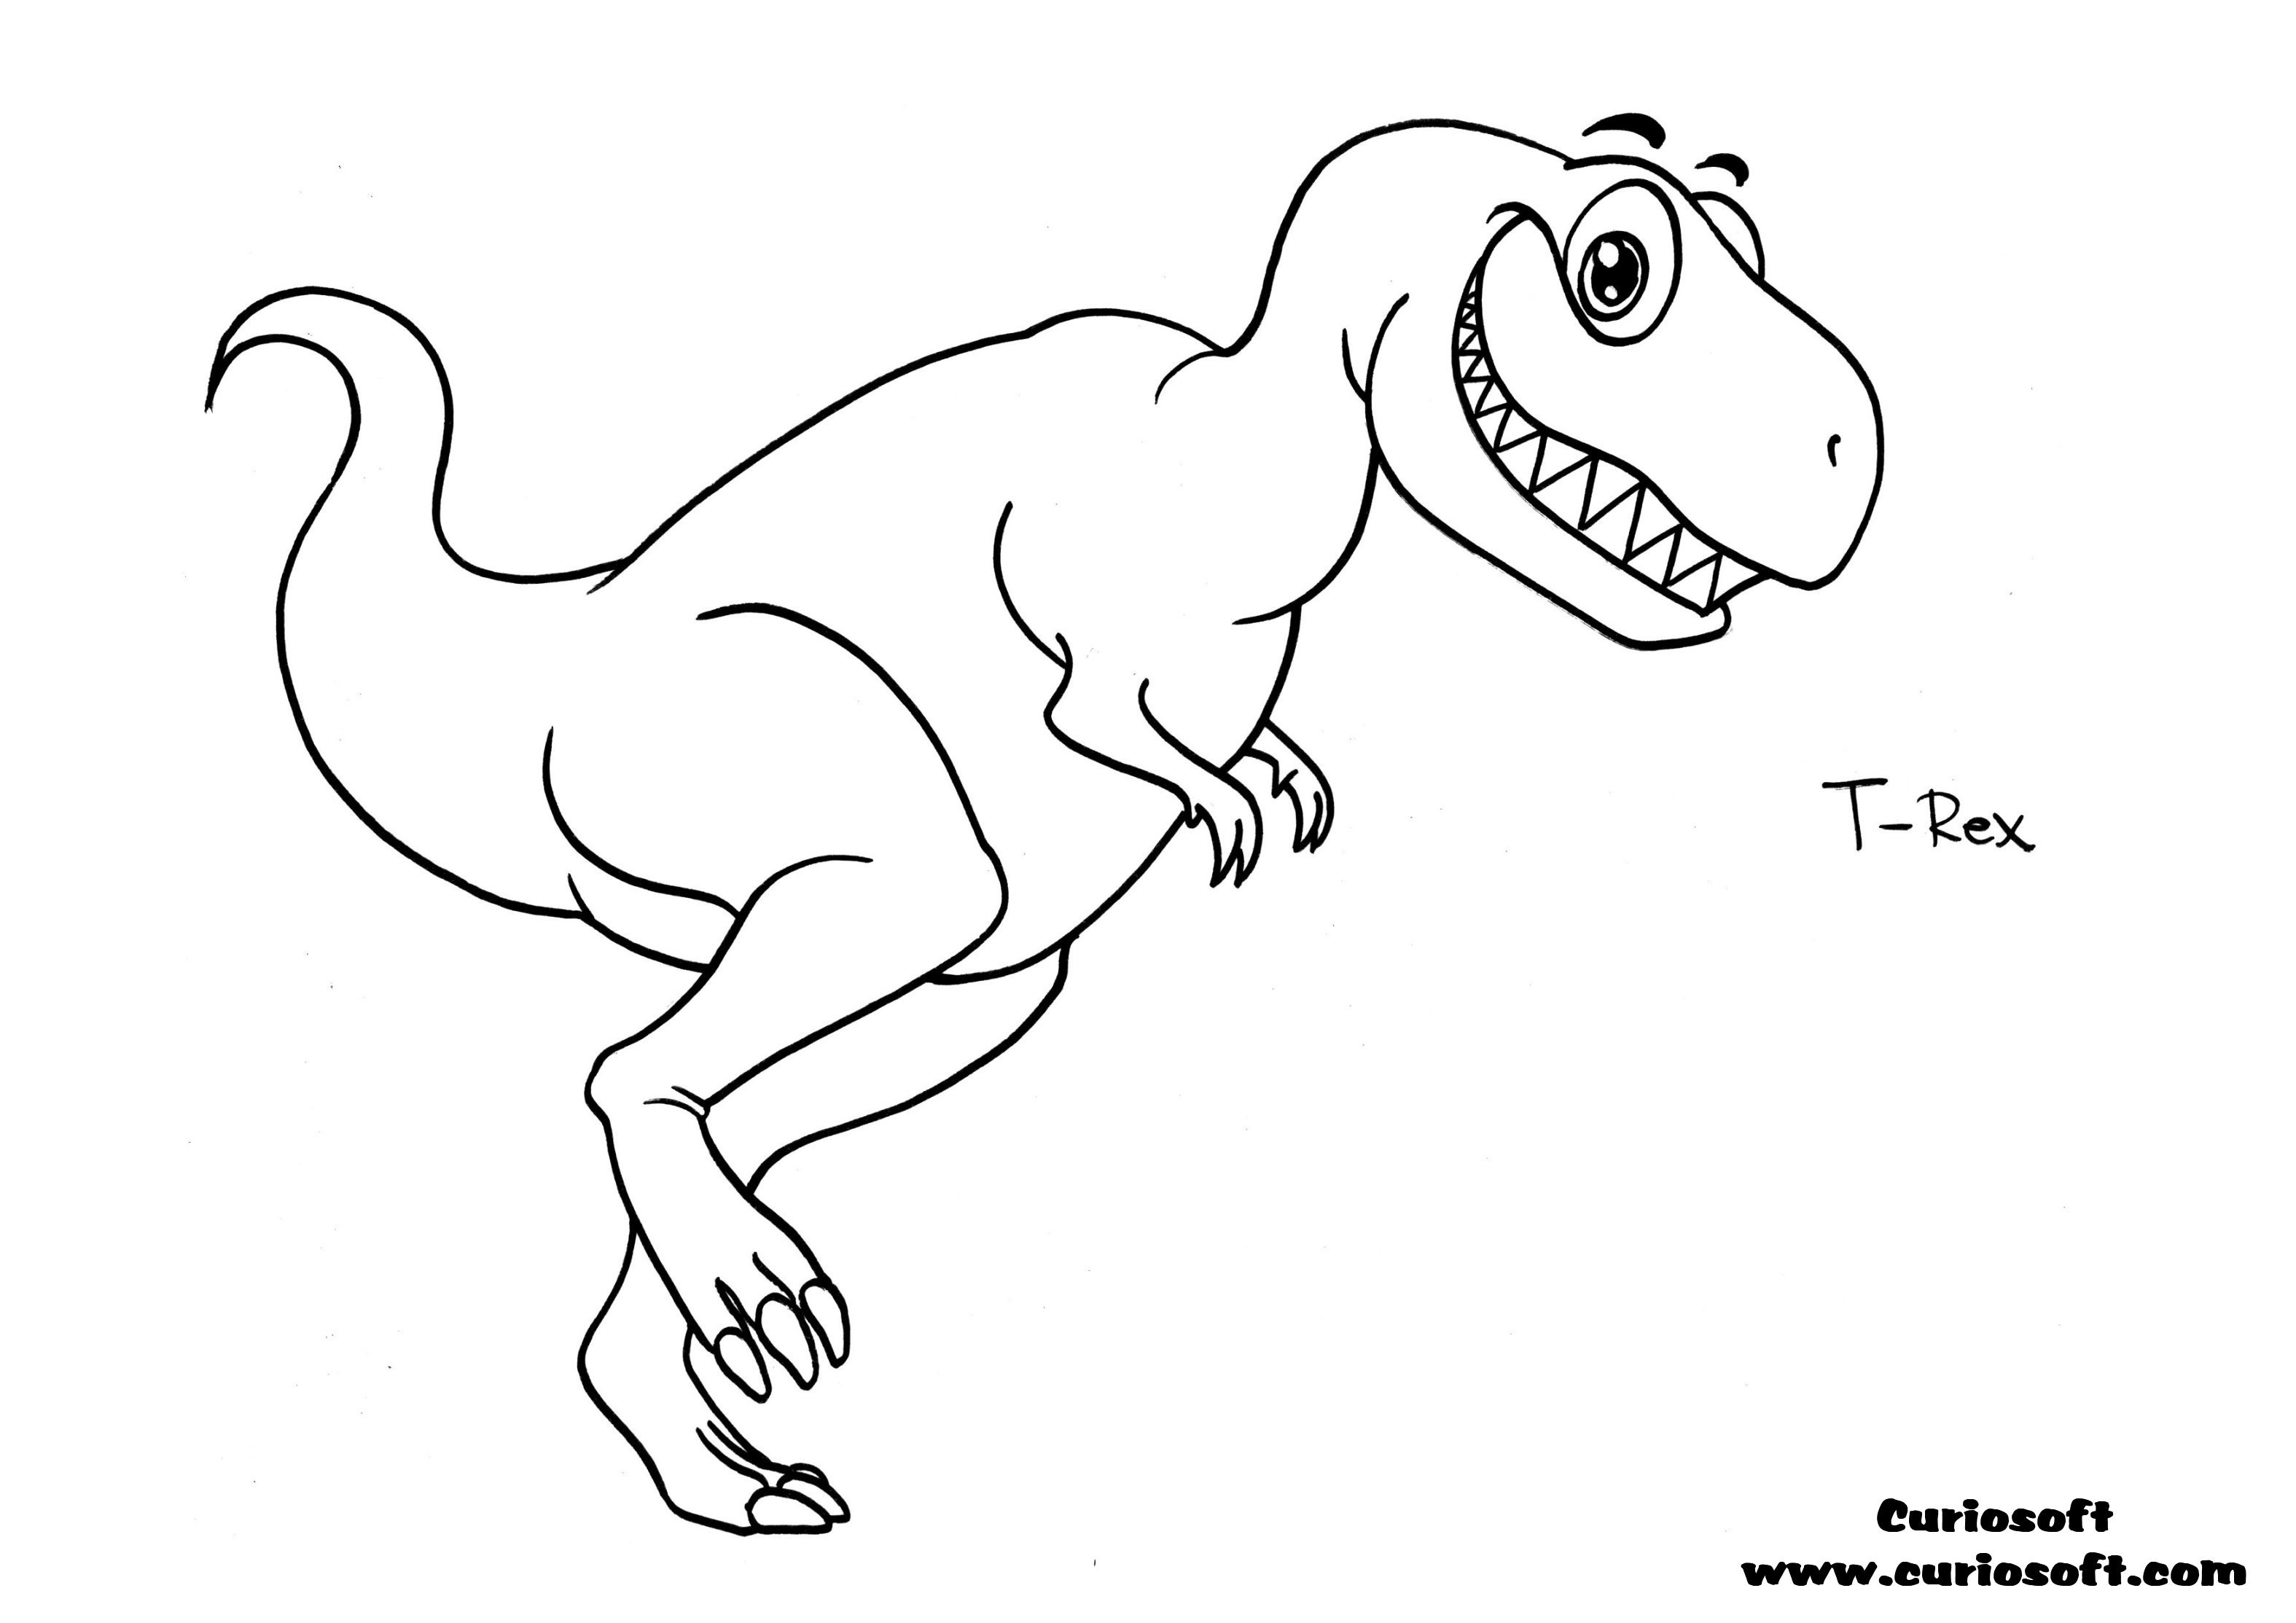 Jurassic World Coloring Pages line New Jurassic Park Coloring Pages Free Printable orango Coloring New T